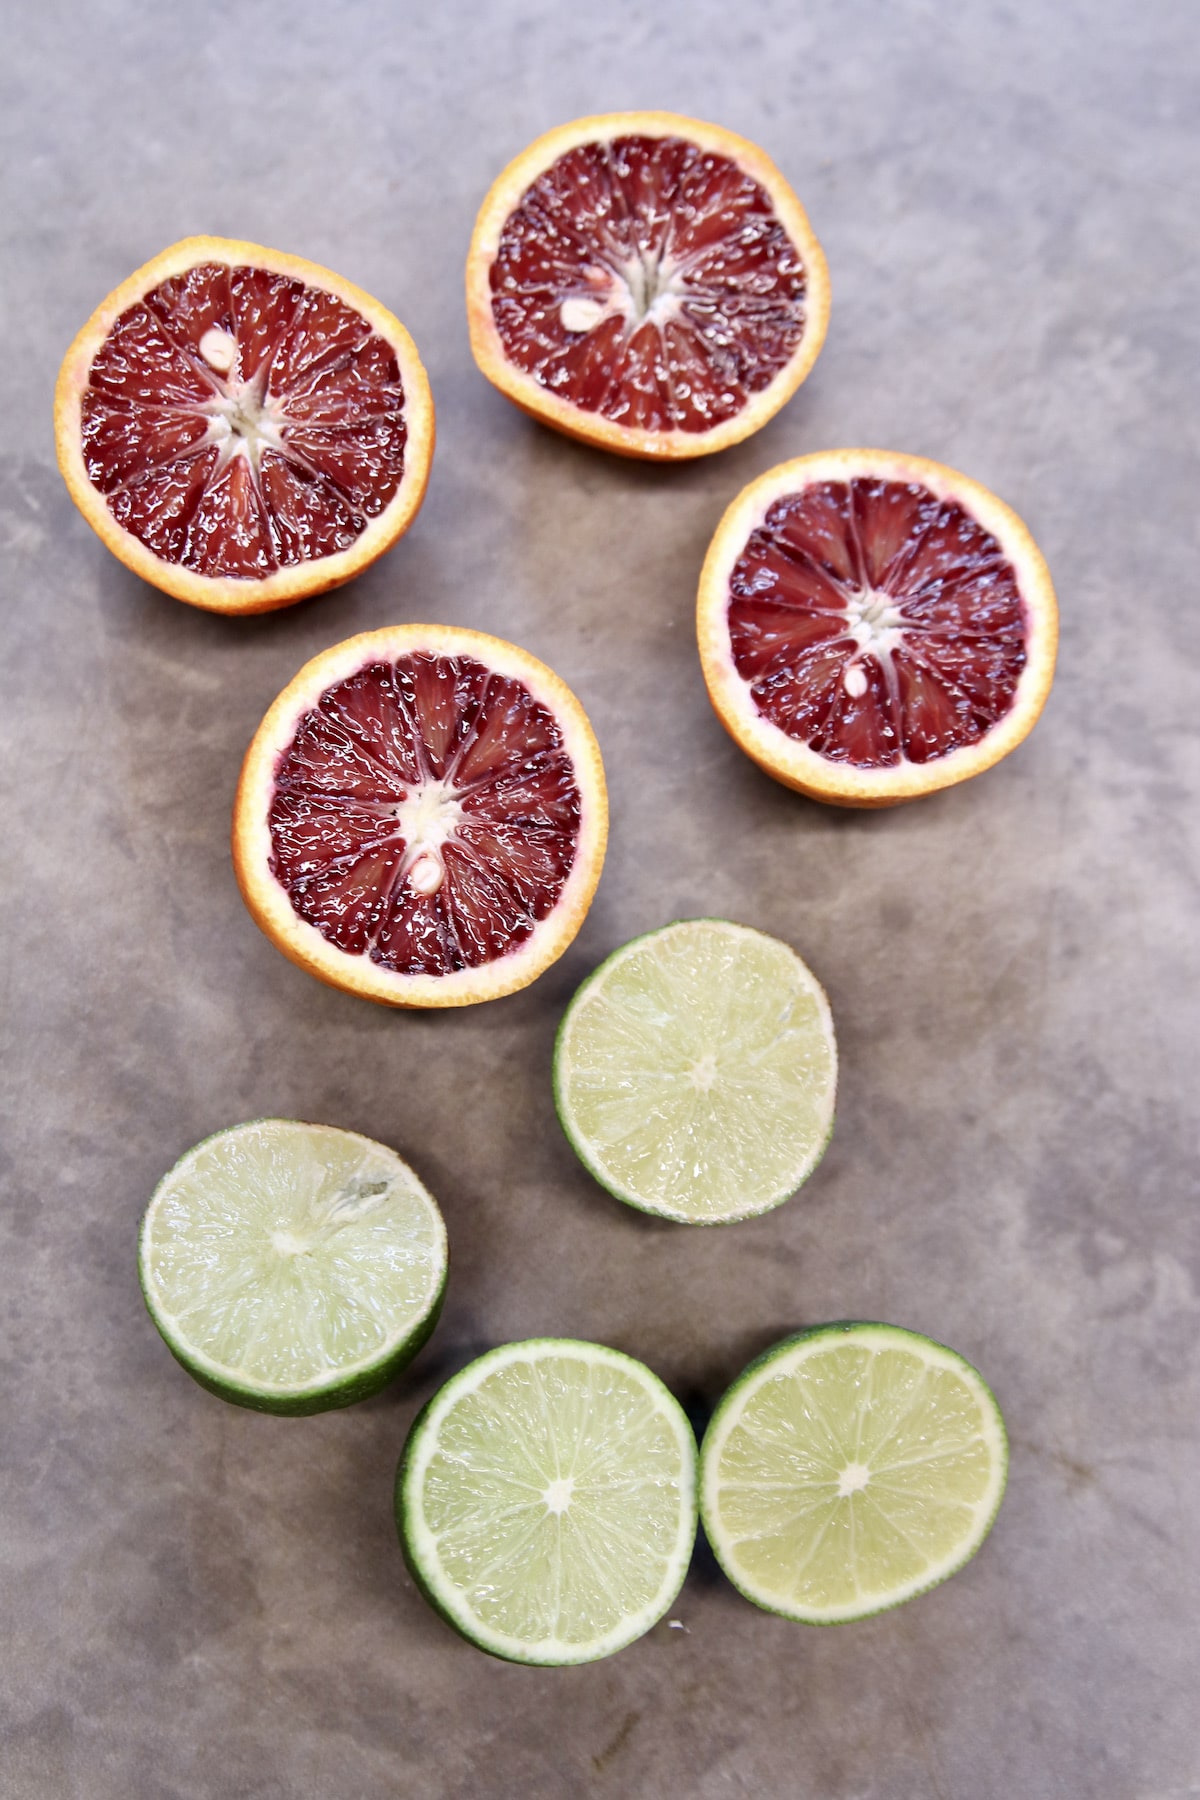 Blood oranges and limes on a cutting board.